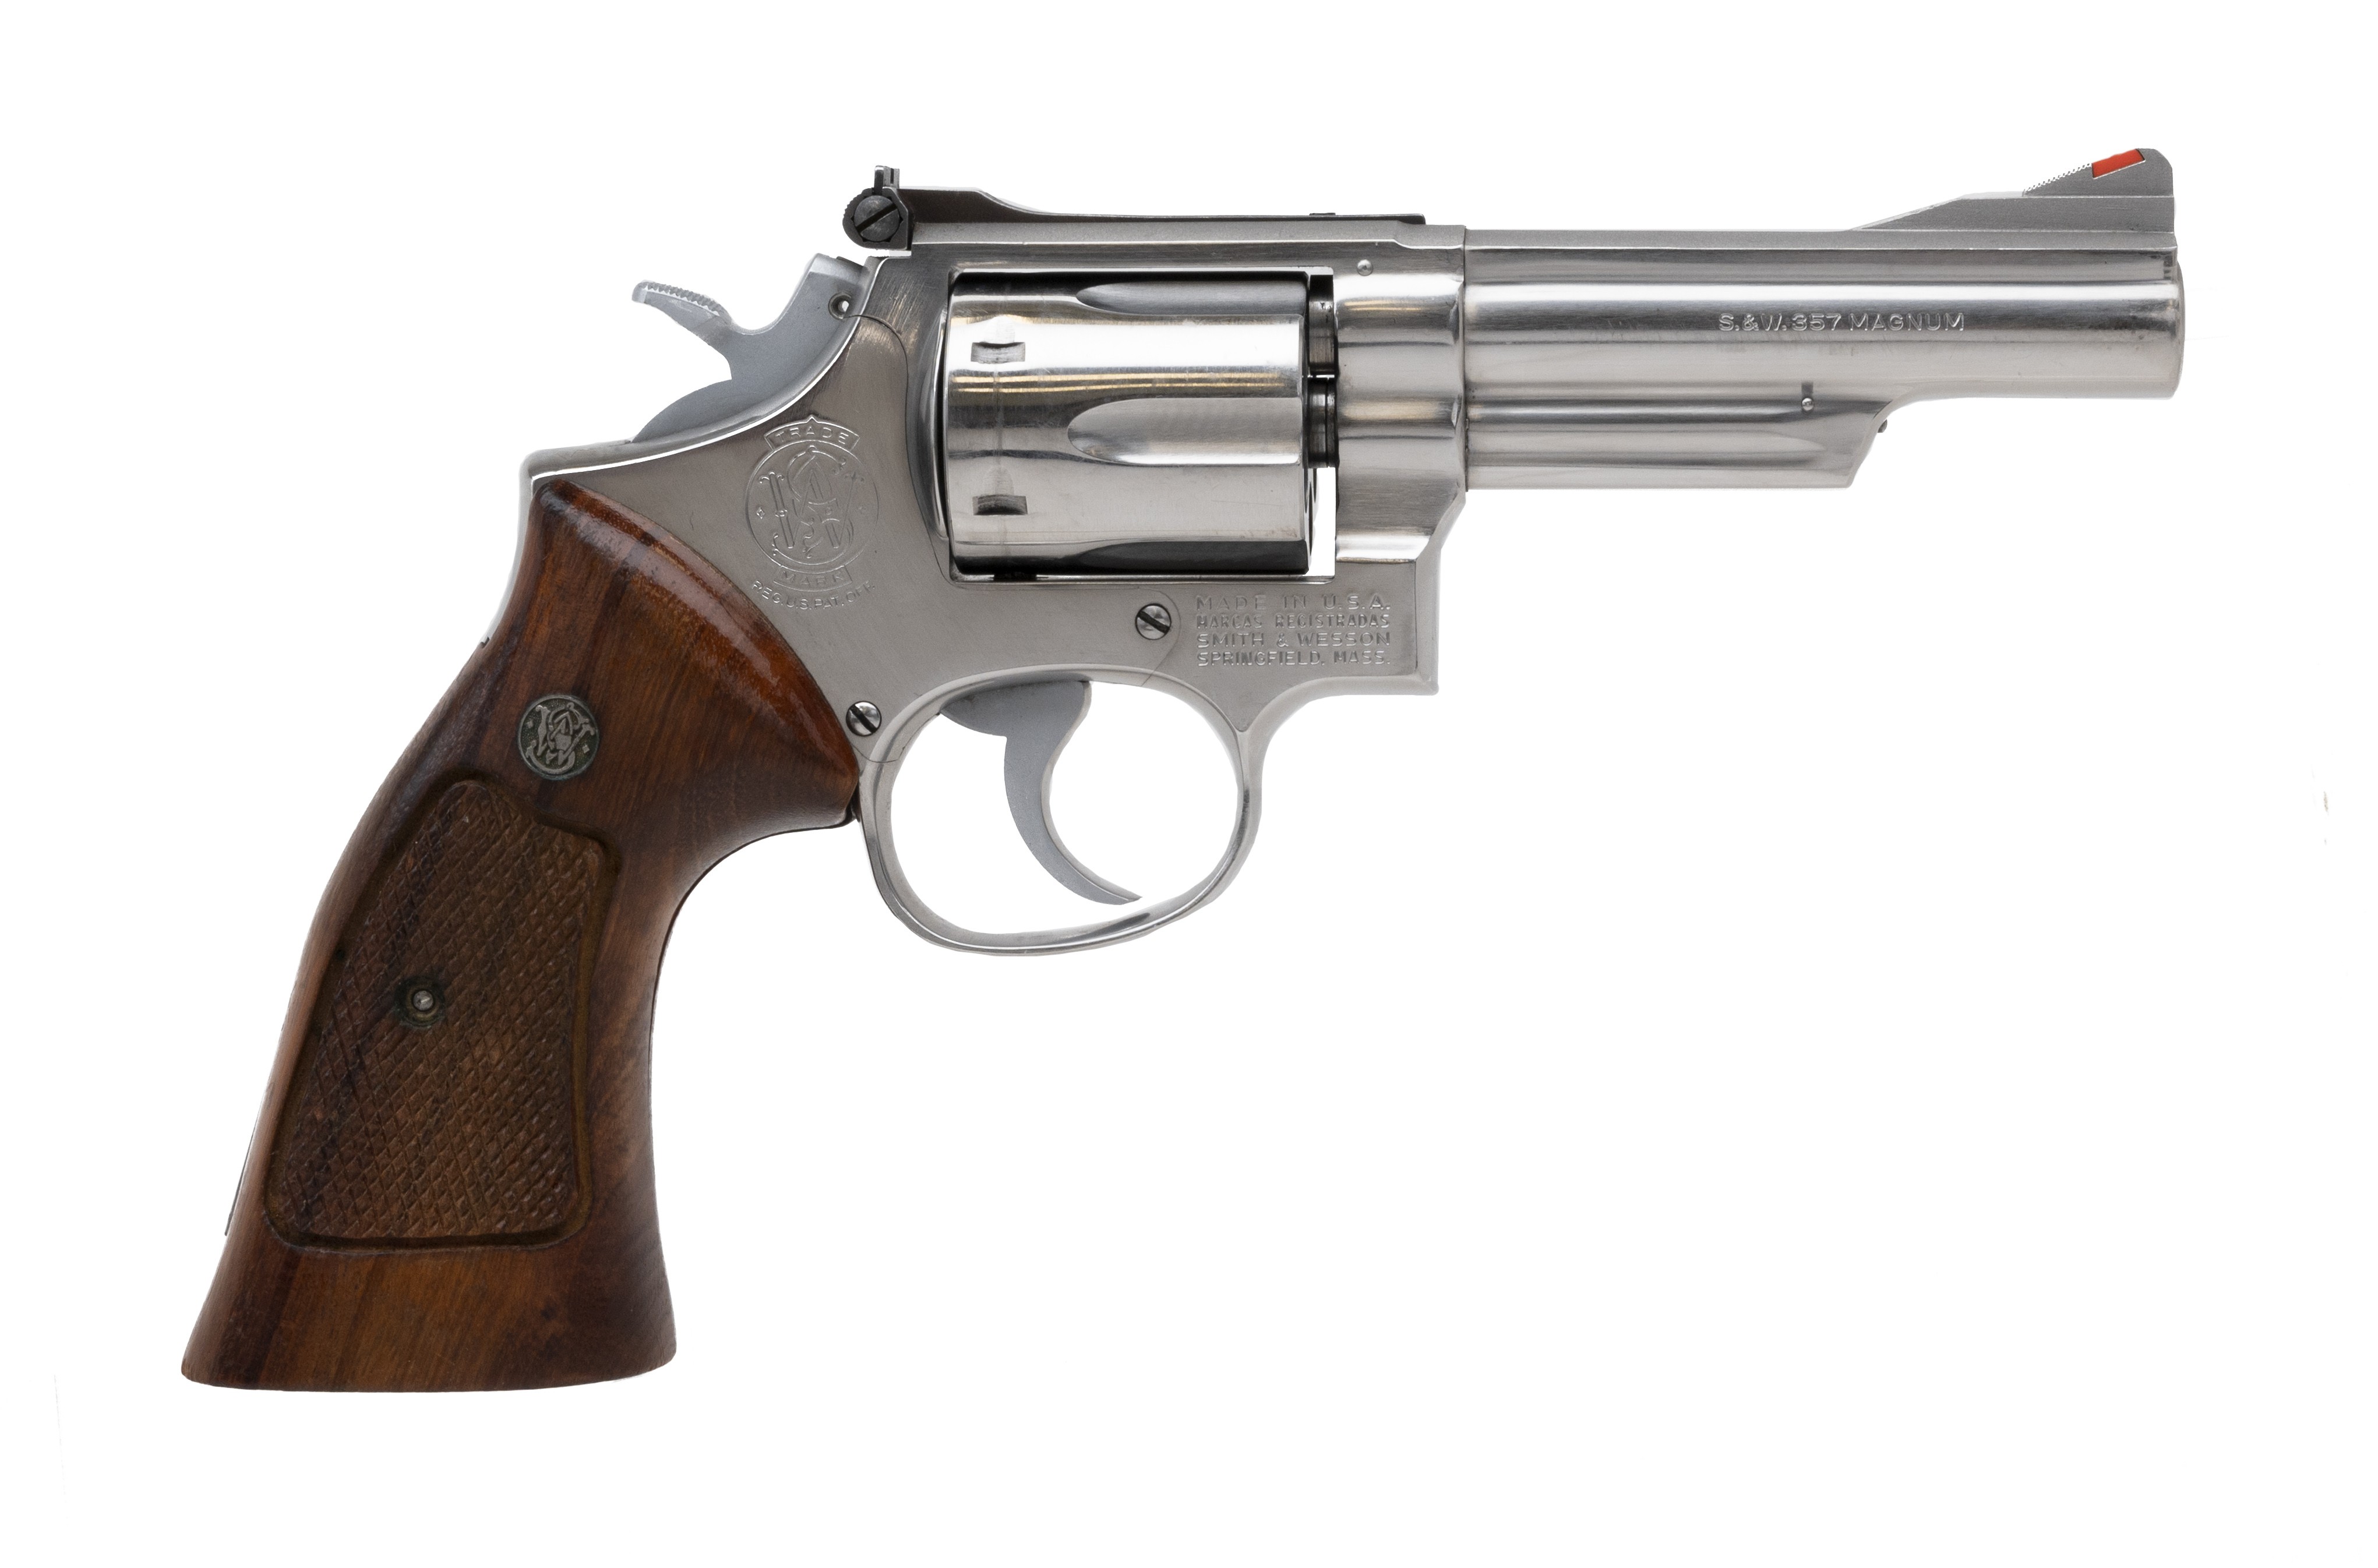 Smith & Wesson 66-1 .357 Magnum for sale.